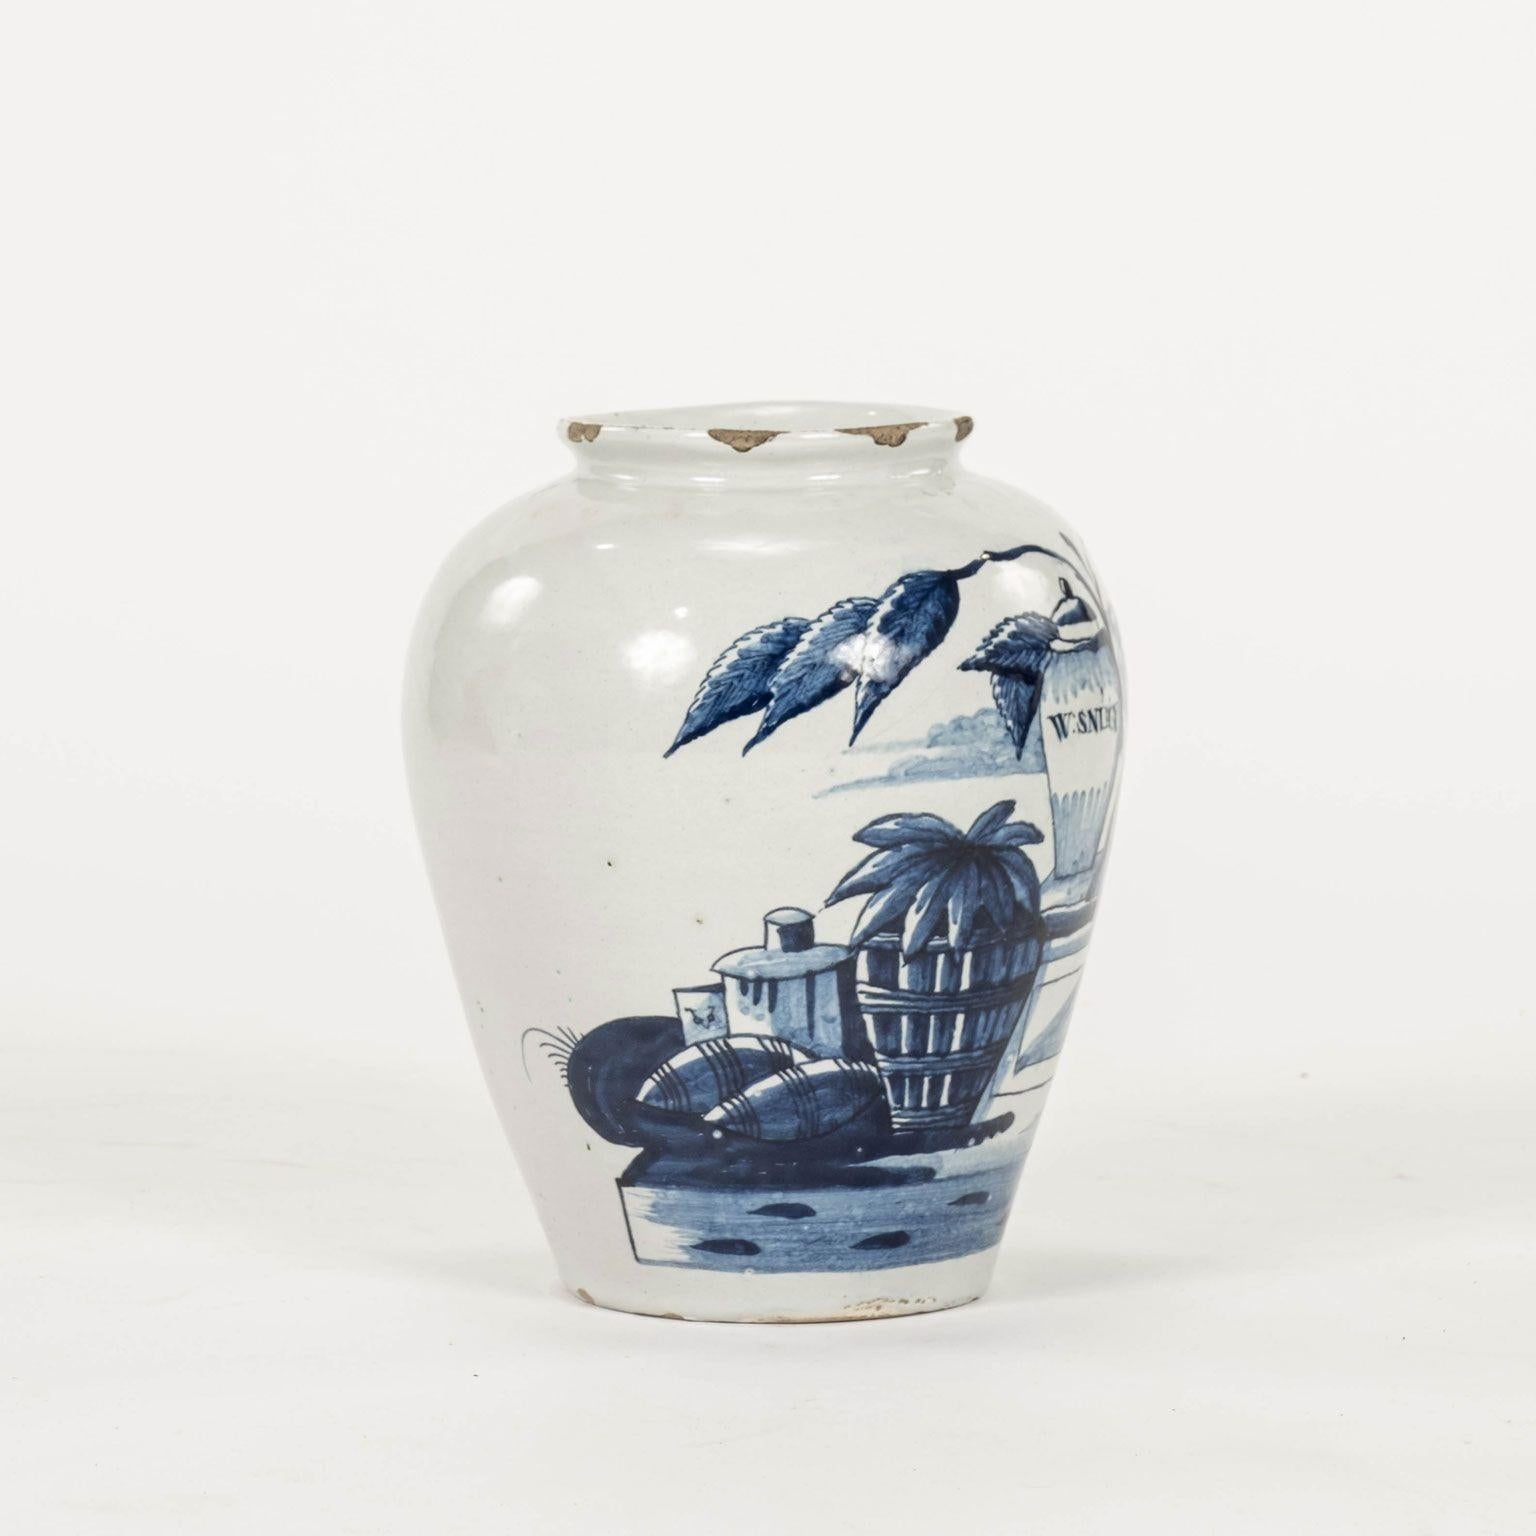 18th Century Delft Blue and White “W:Snuif” Tobacco Jar For Sale